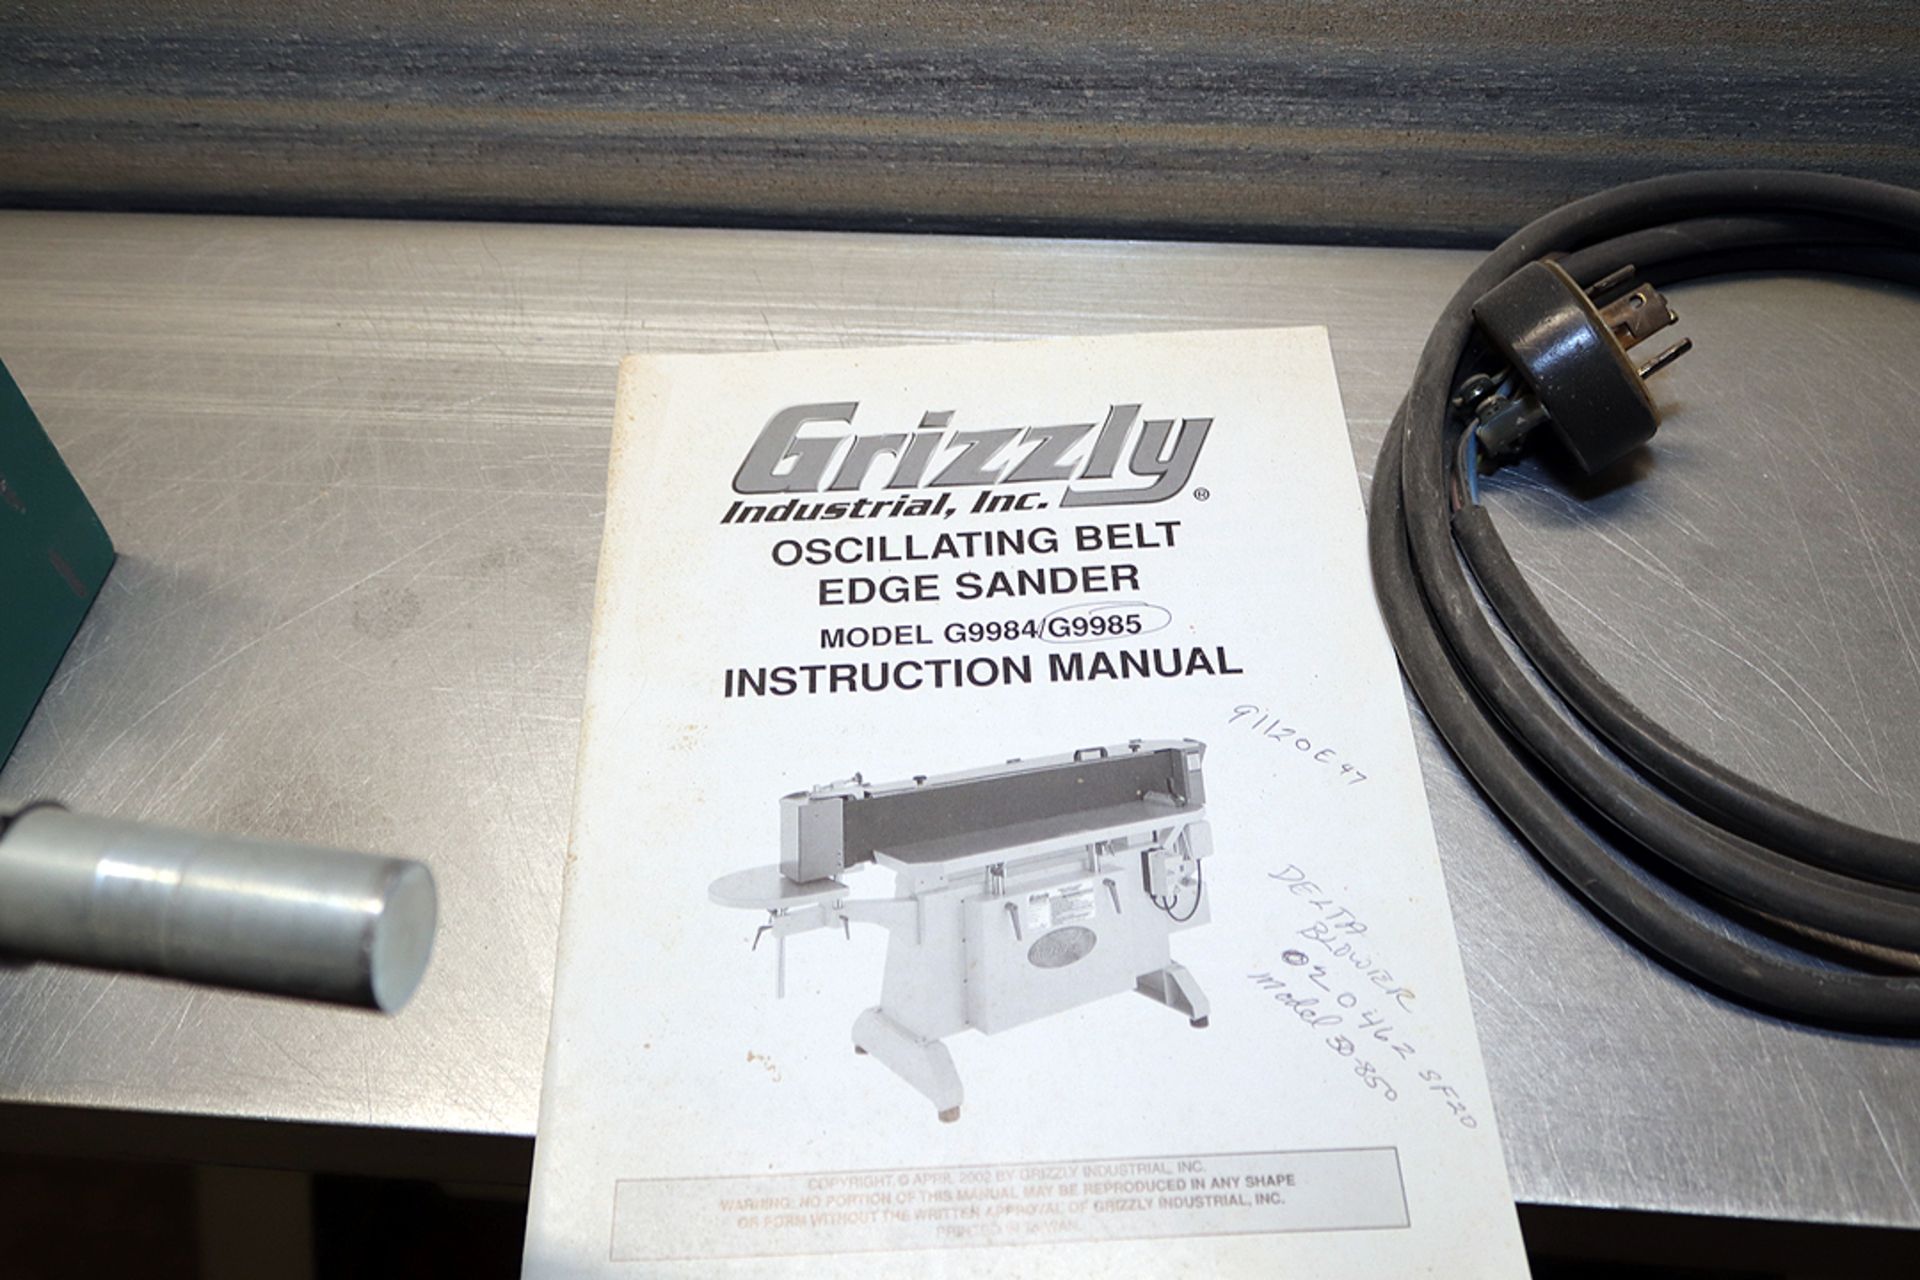 Grizzly model G9985 oscillating edge sander, 3 phase, oscillating function sticks occasionally - Image 5 of 10